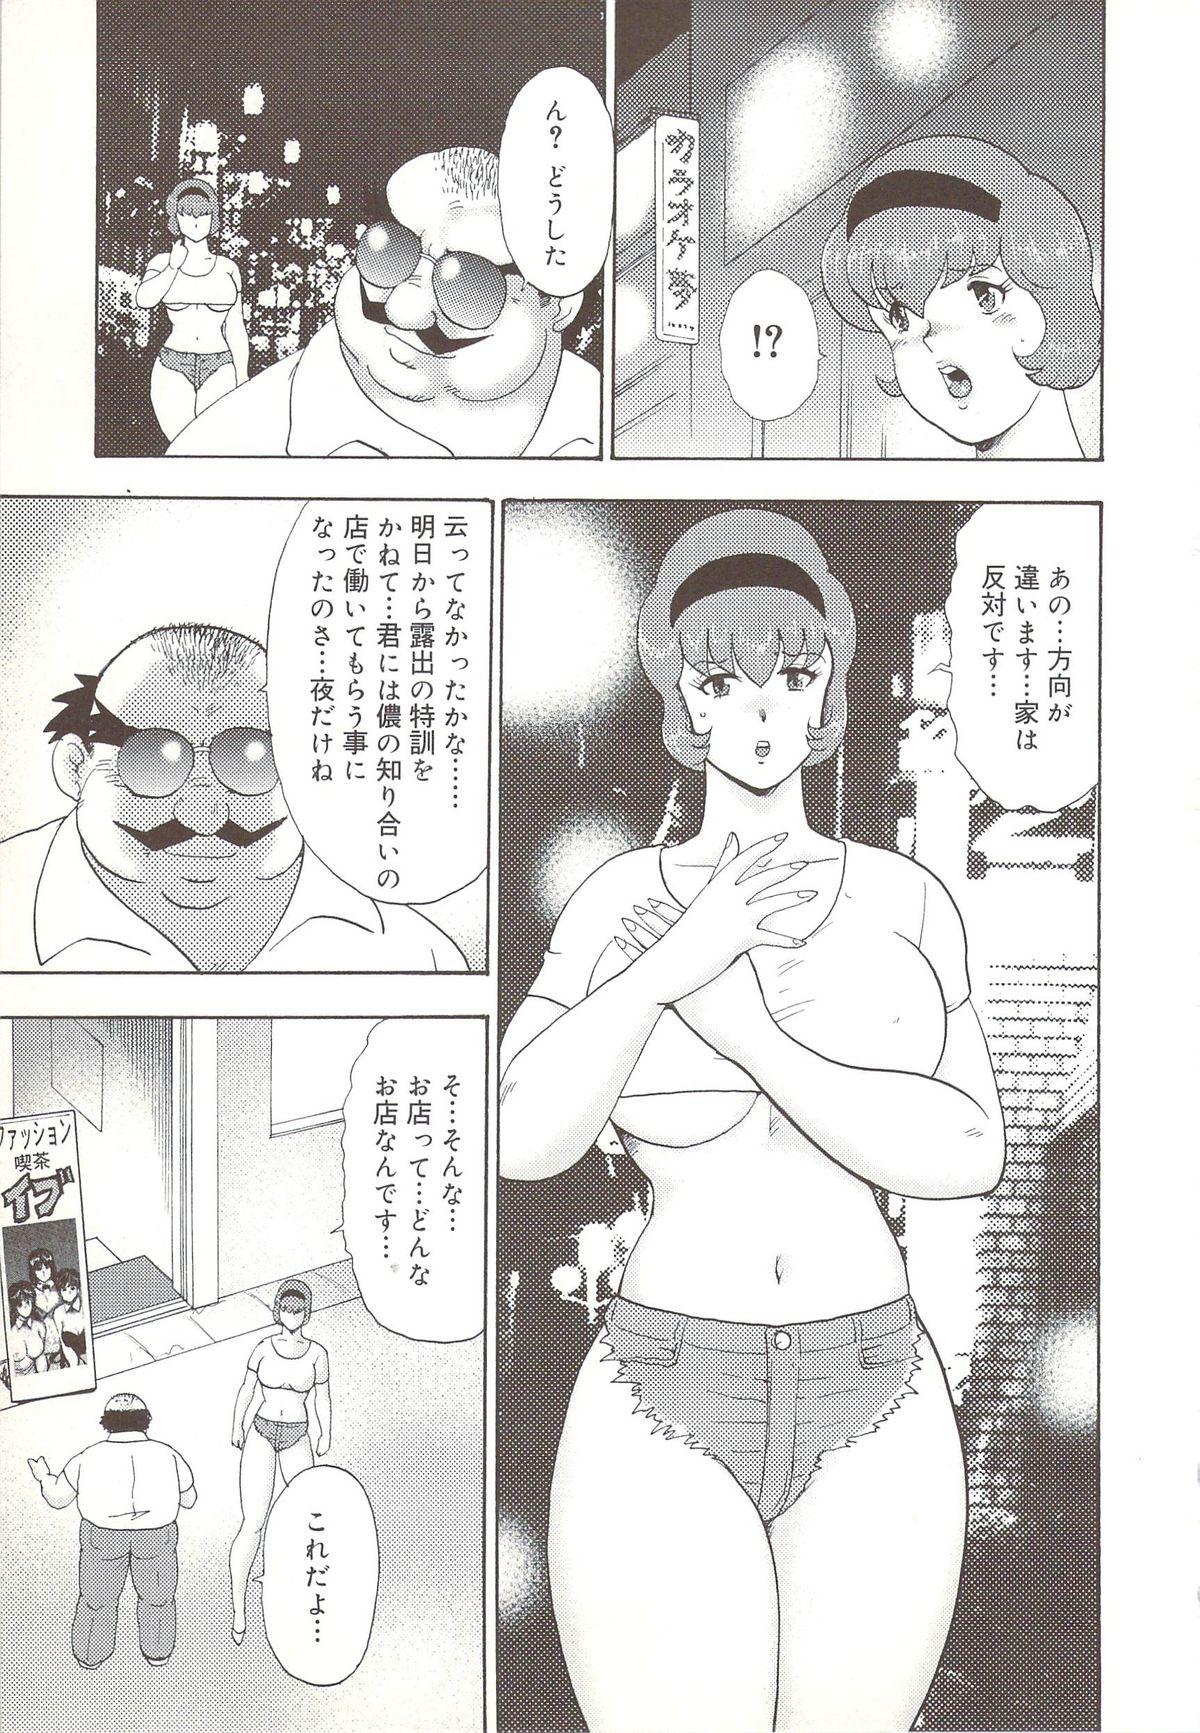 Bald Pussy Maihime Rosyutsu Tyoukyou Lolicon - Page 12